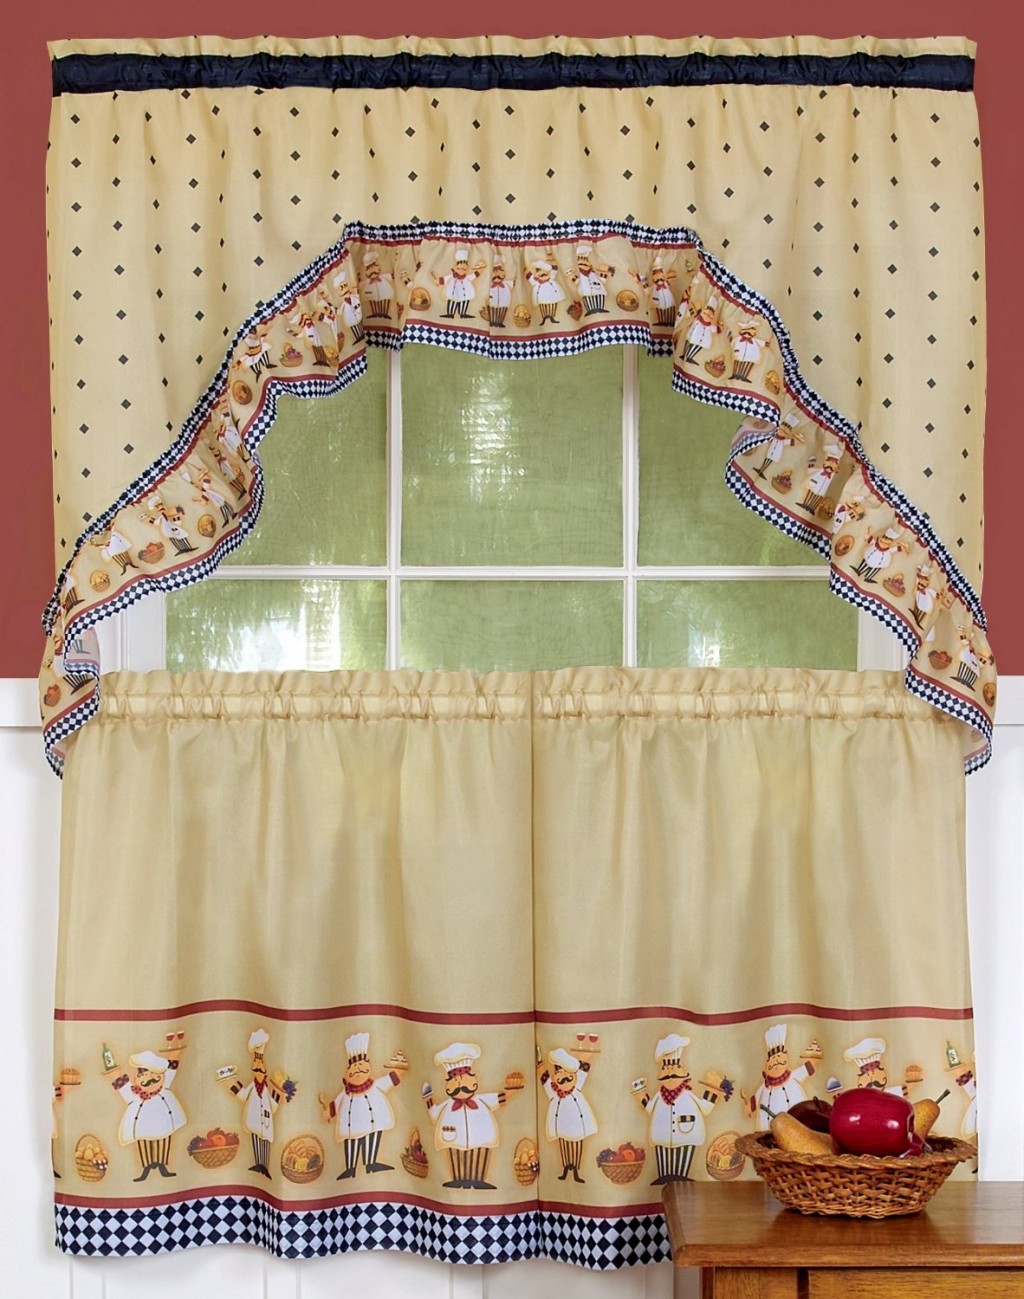 Fat Chef Curtains in Curtain